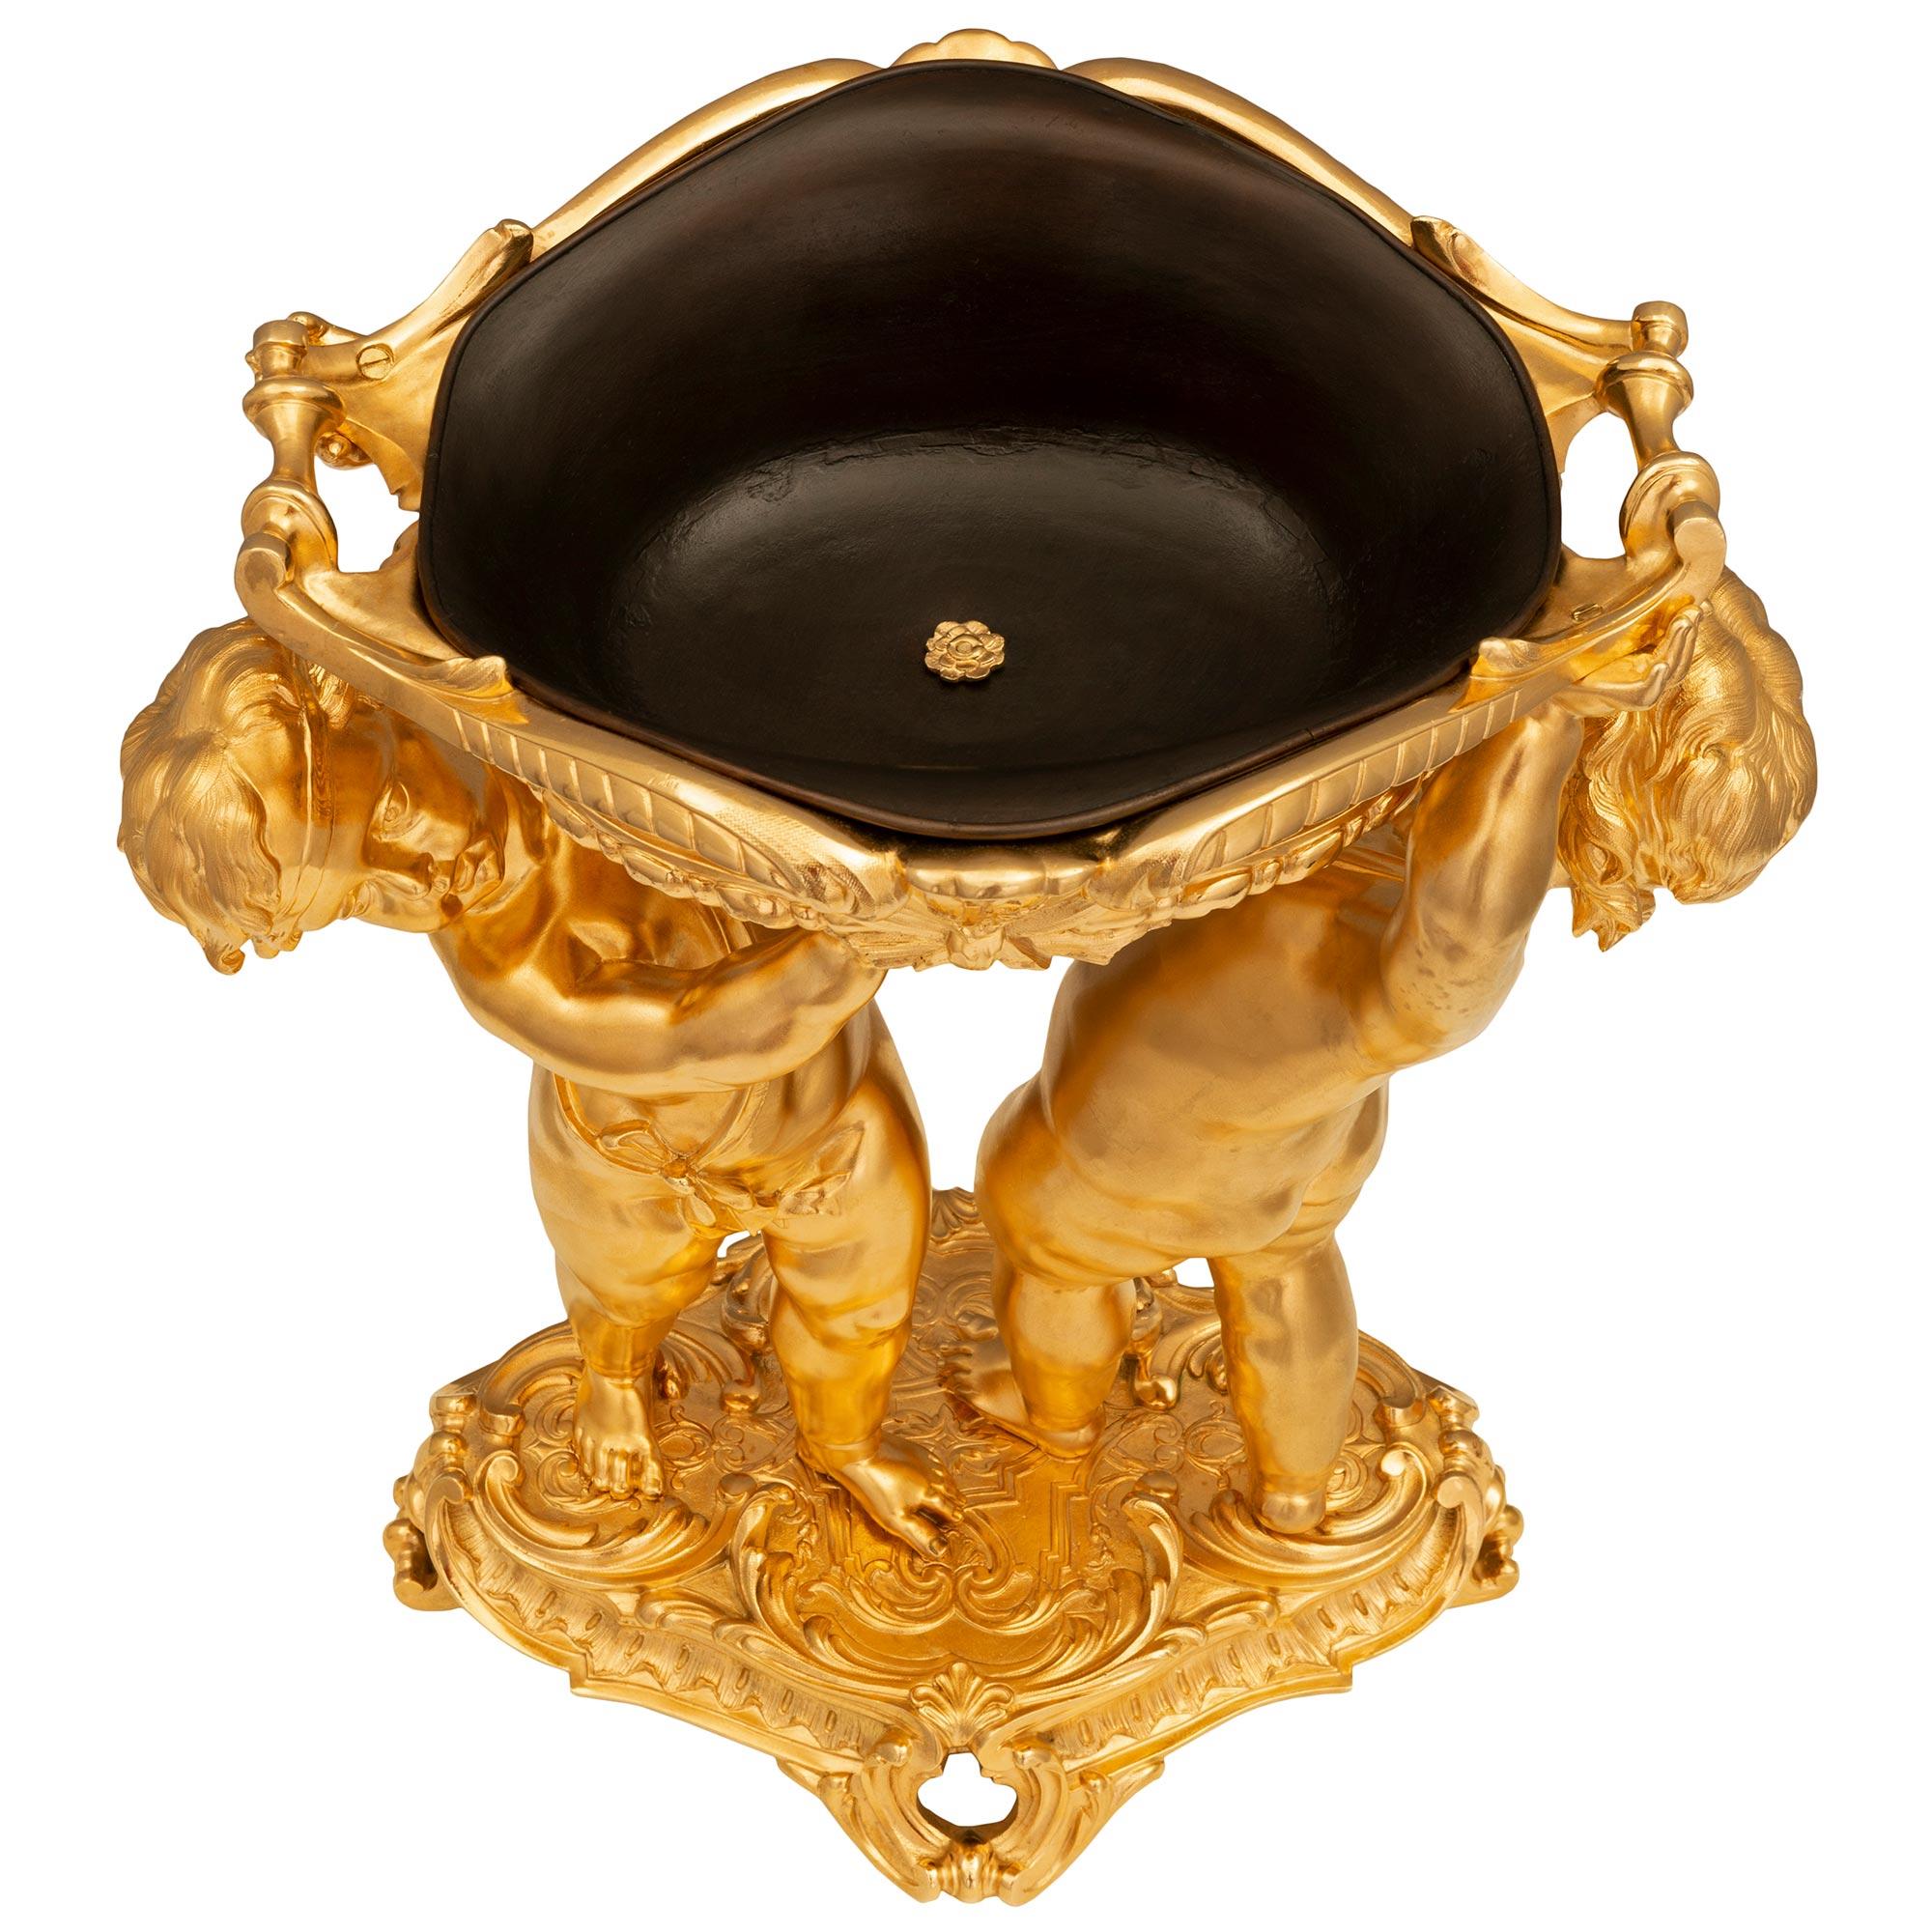 A stunning and extremely high quality French 19th century Louis XVI st. Belle Époque period ormolu and patinated bronze centerpiece. The centerpiece is raised by an elegant pierced oblong base with striking Rocaille designs, beautiful scrolled